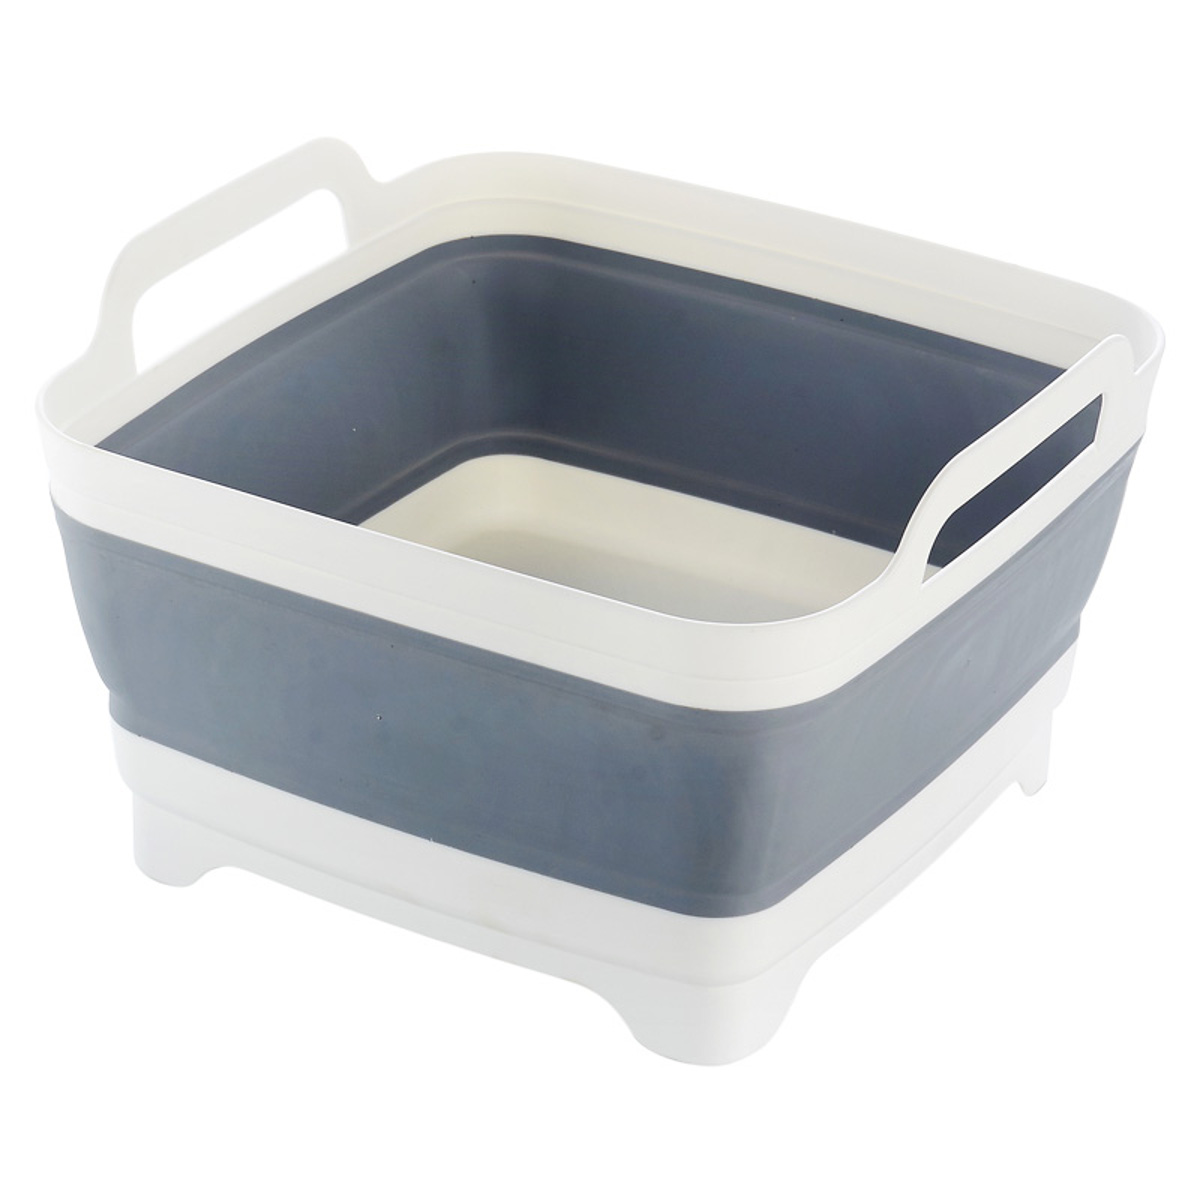 Space-Saving-Collapsible-Sink-Grey-Silicone-for-Home-Caravan-Boat-RV-Camping-1192828